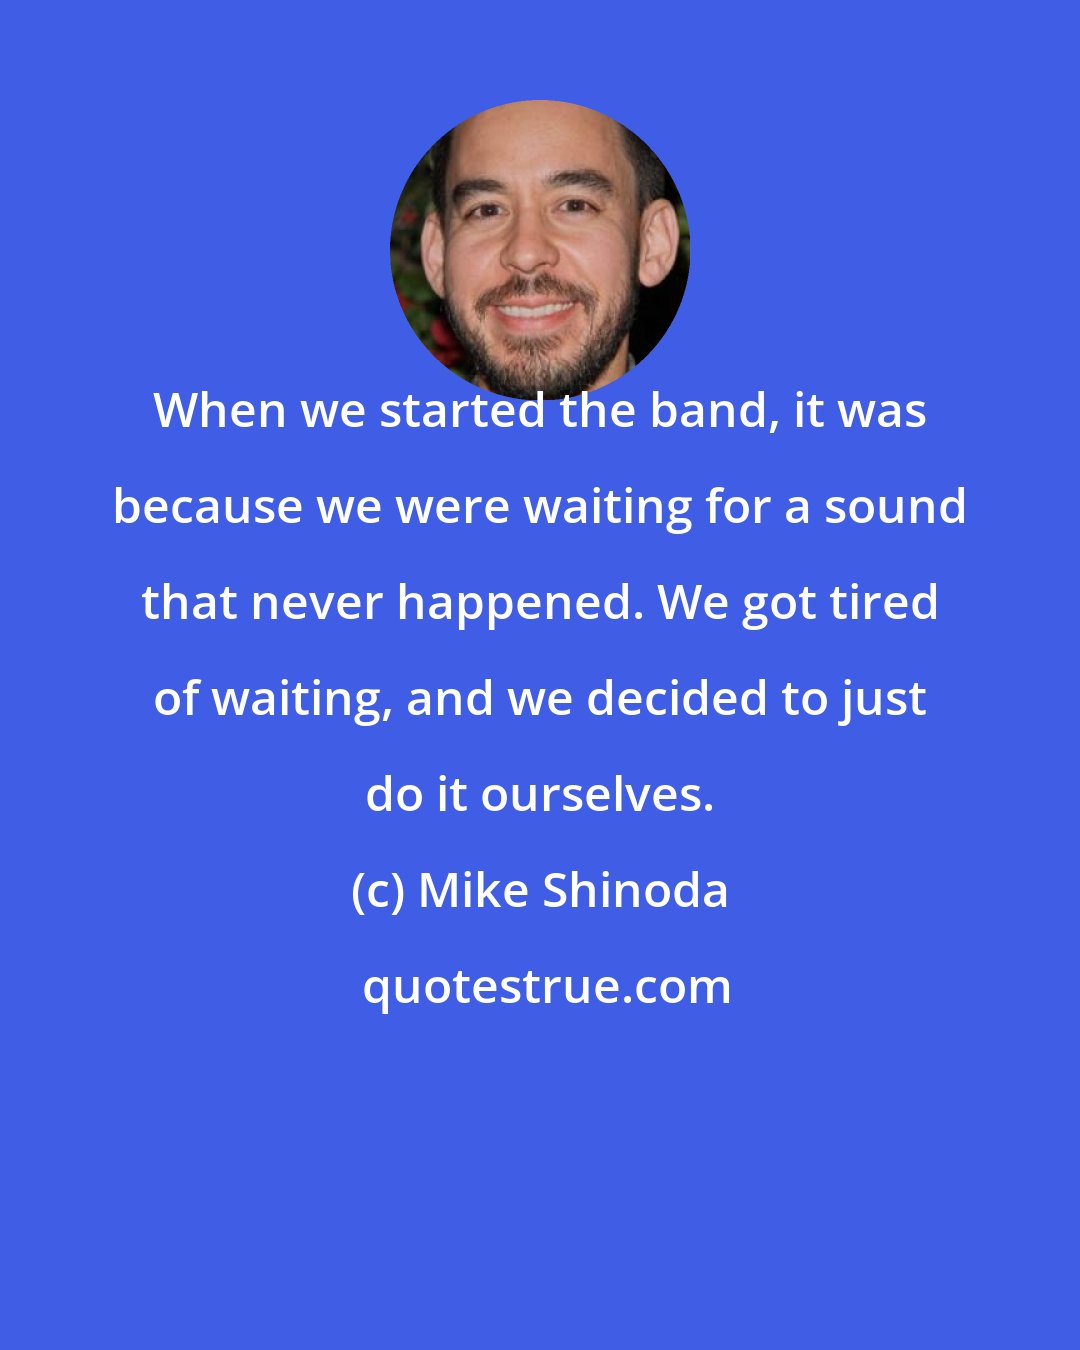 Mike Shinoda: When we started the band, it was because we were waiting for a sound that never happened. We got tired of waiting, and we decided to just do it ourselves.